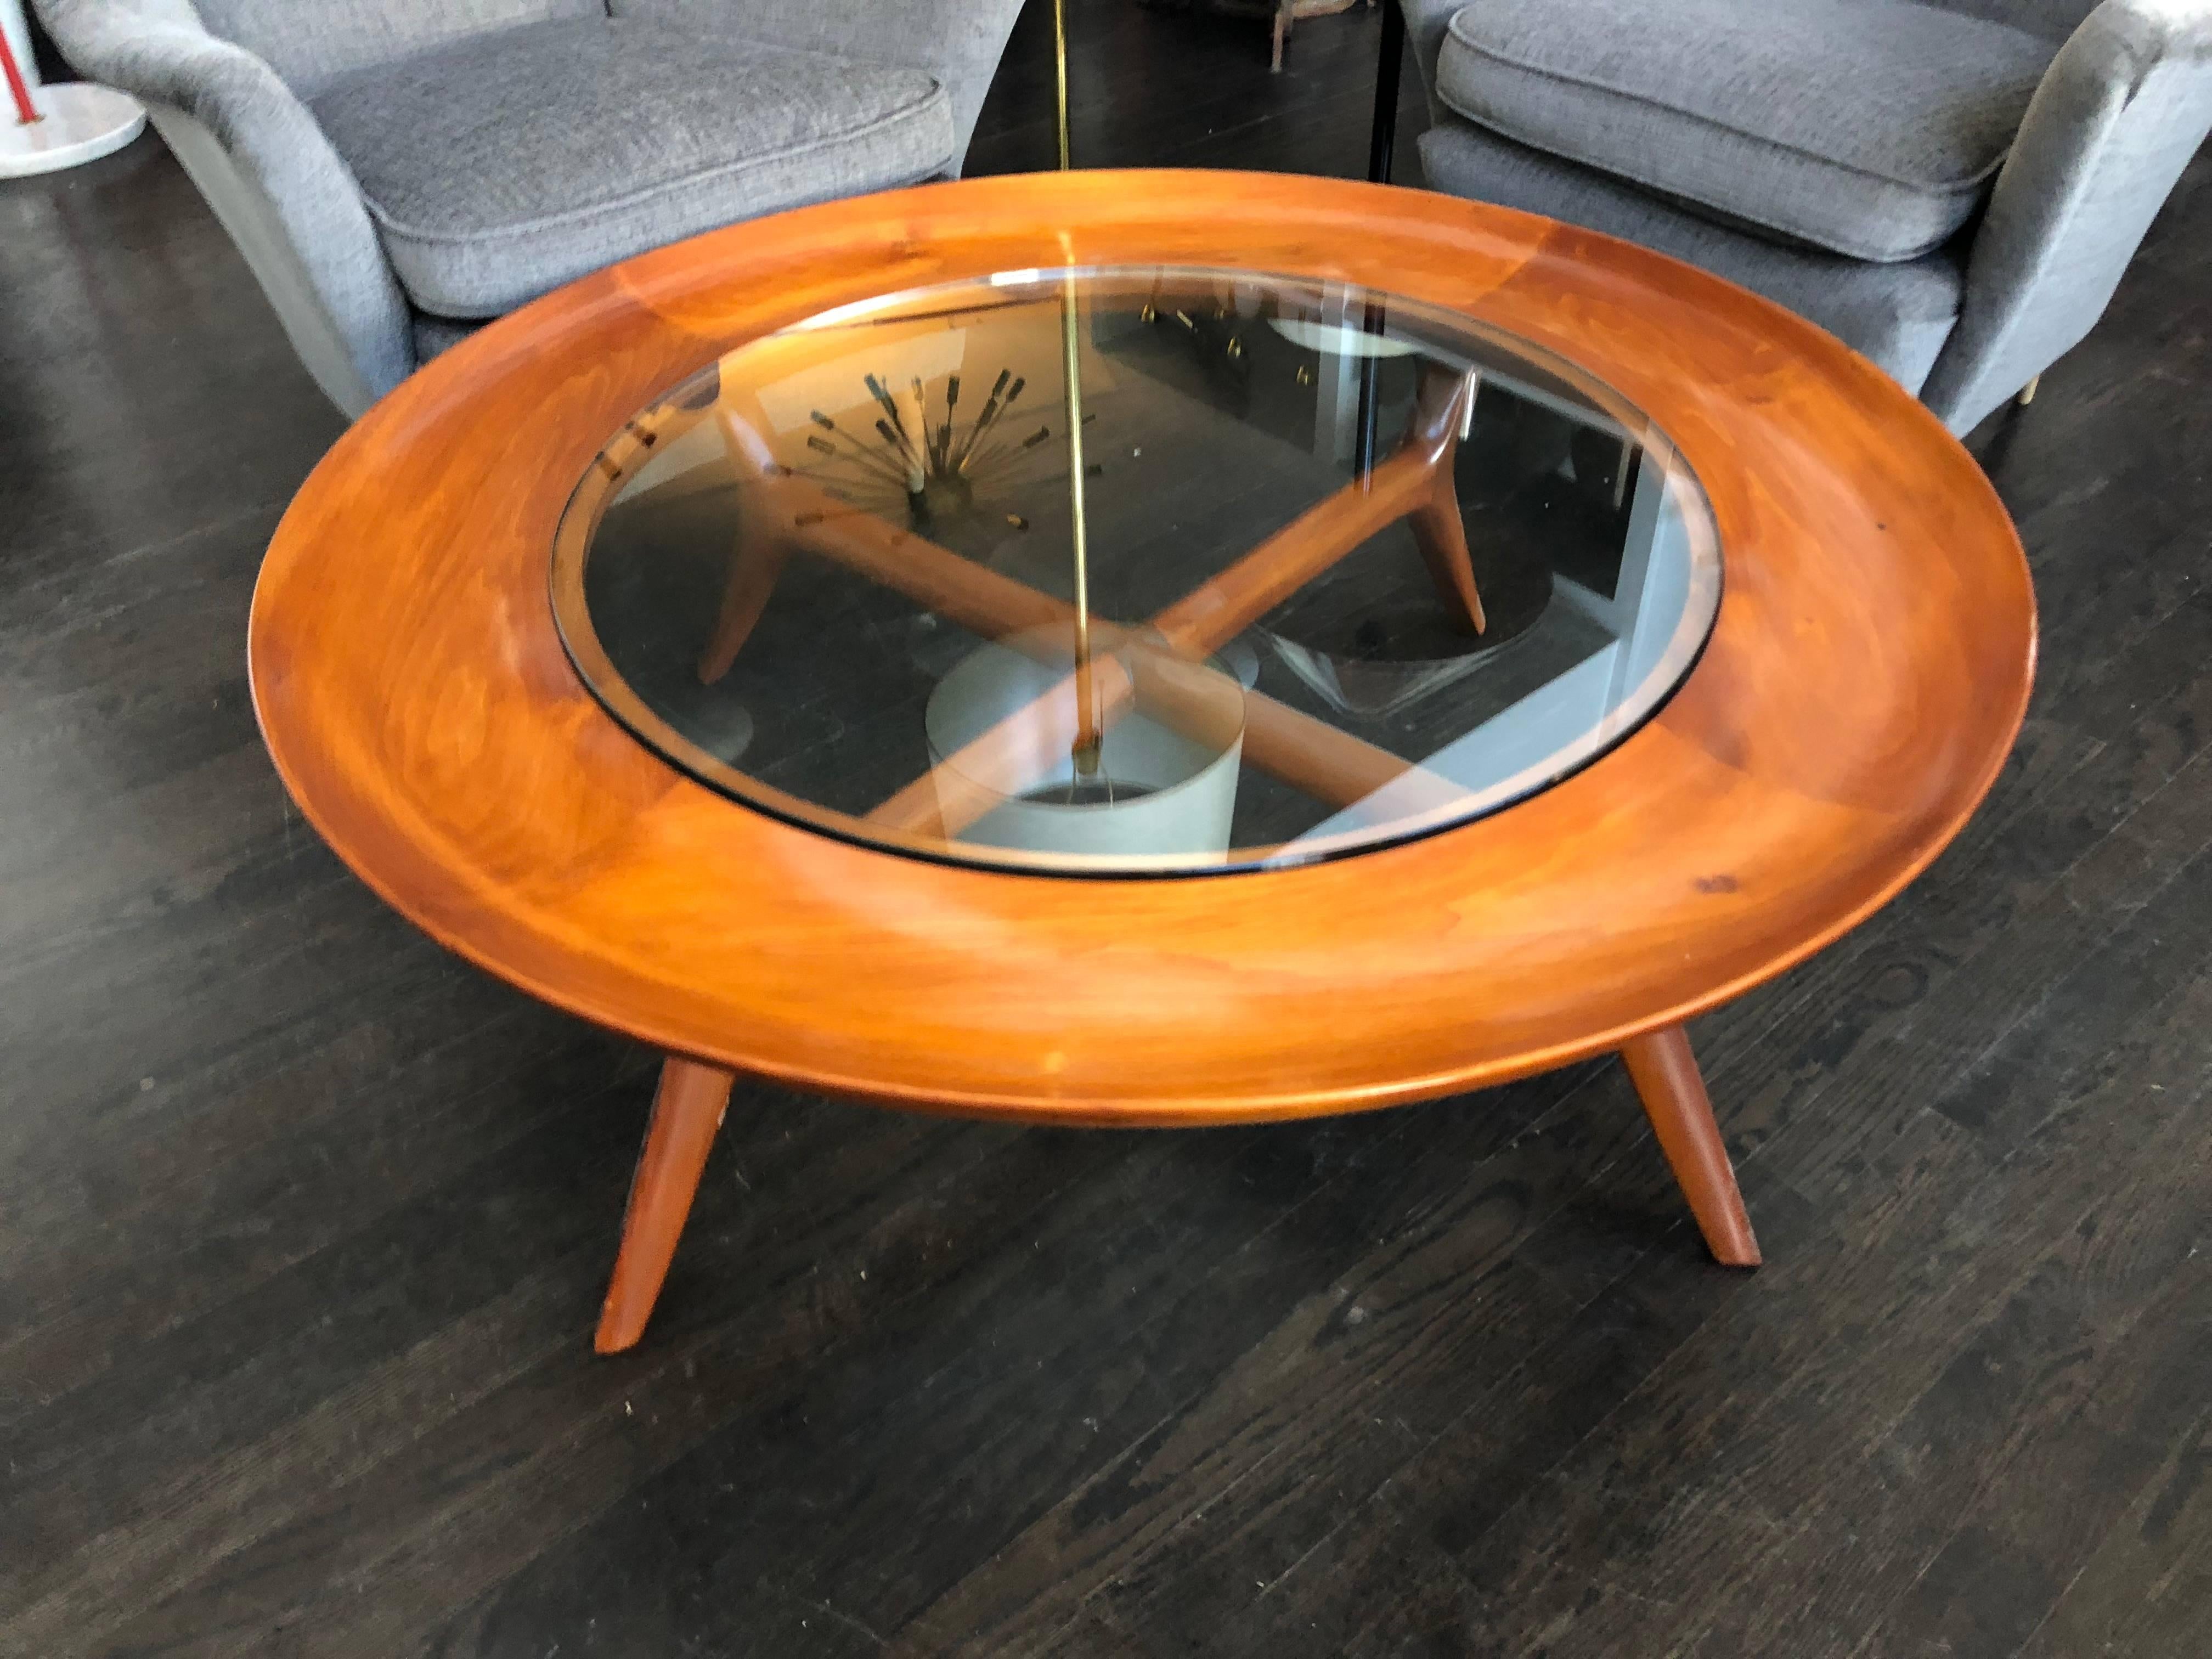 Elegant walnut coffee table adapted from Gio Ponti design style. This table features four curved legs with curved/molded stretcher and convex shaped top with glass center inset top. Custom options are available in size and finish. Made in